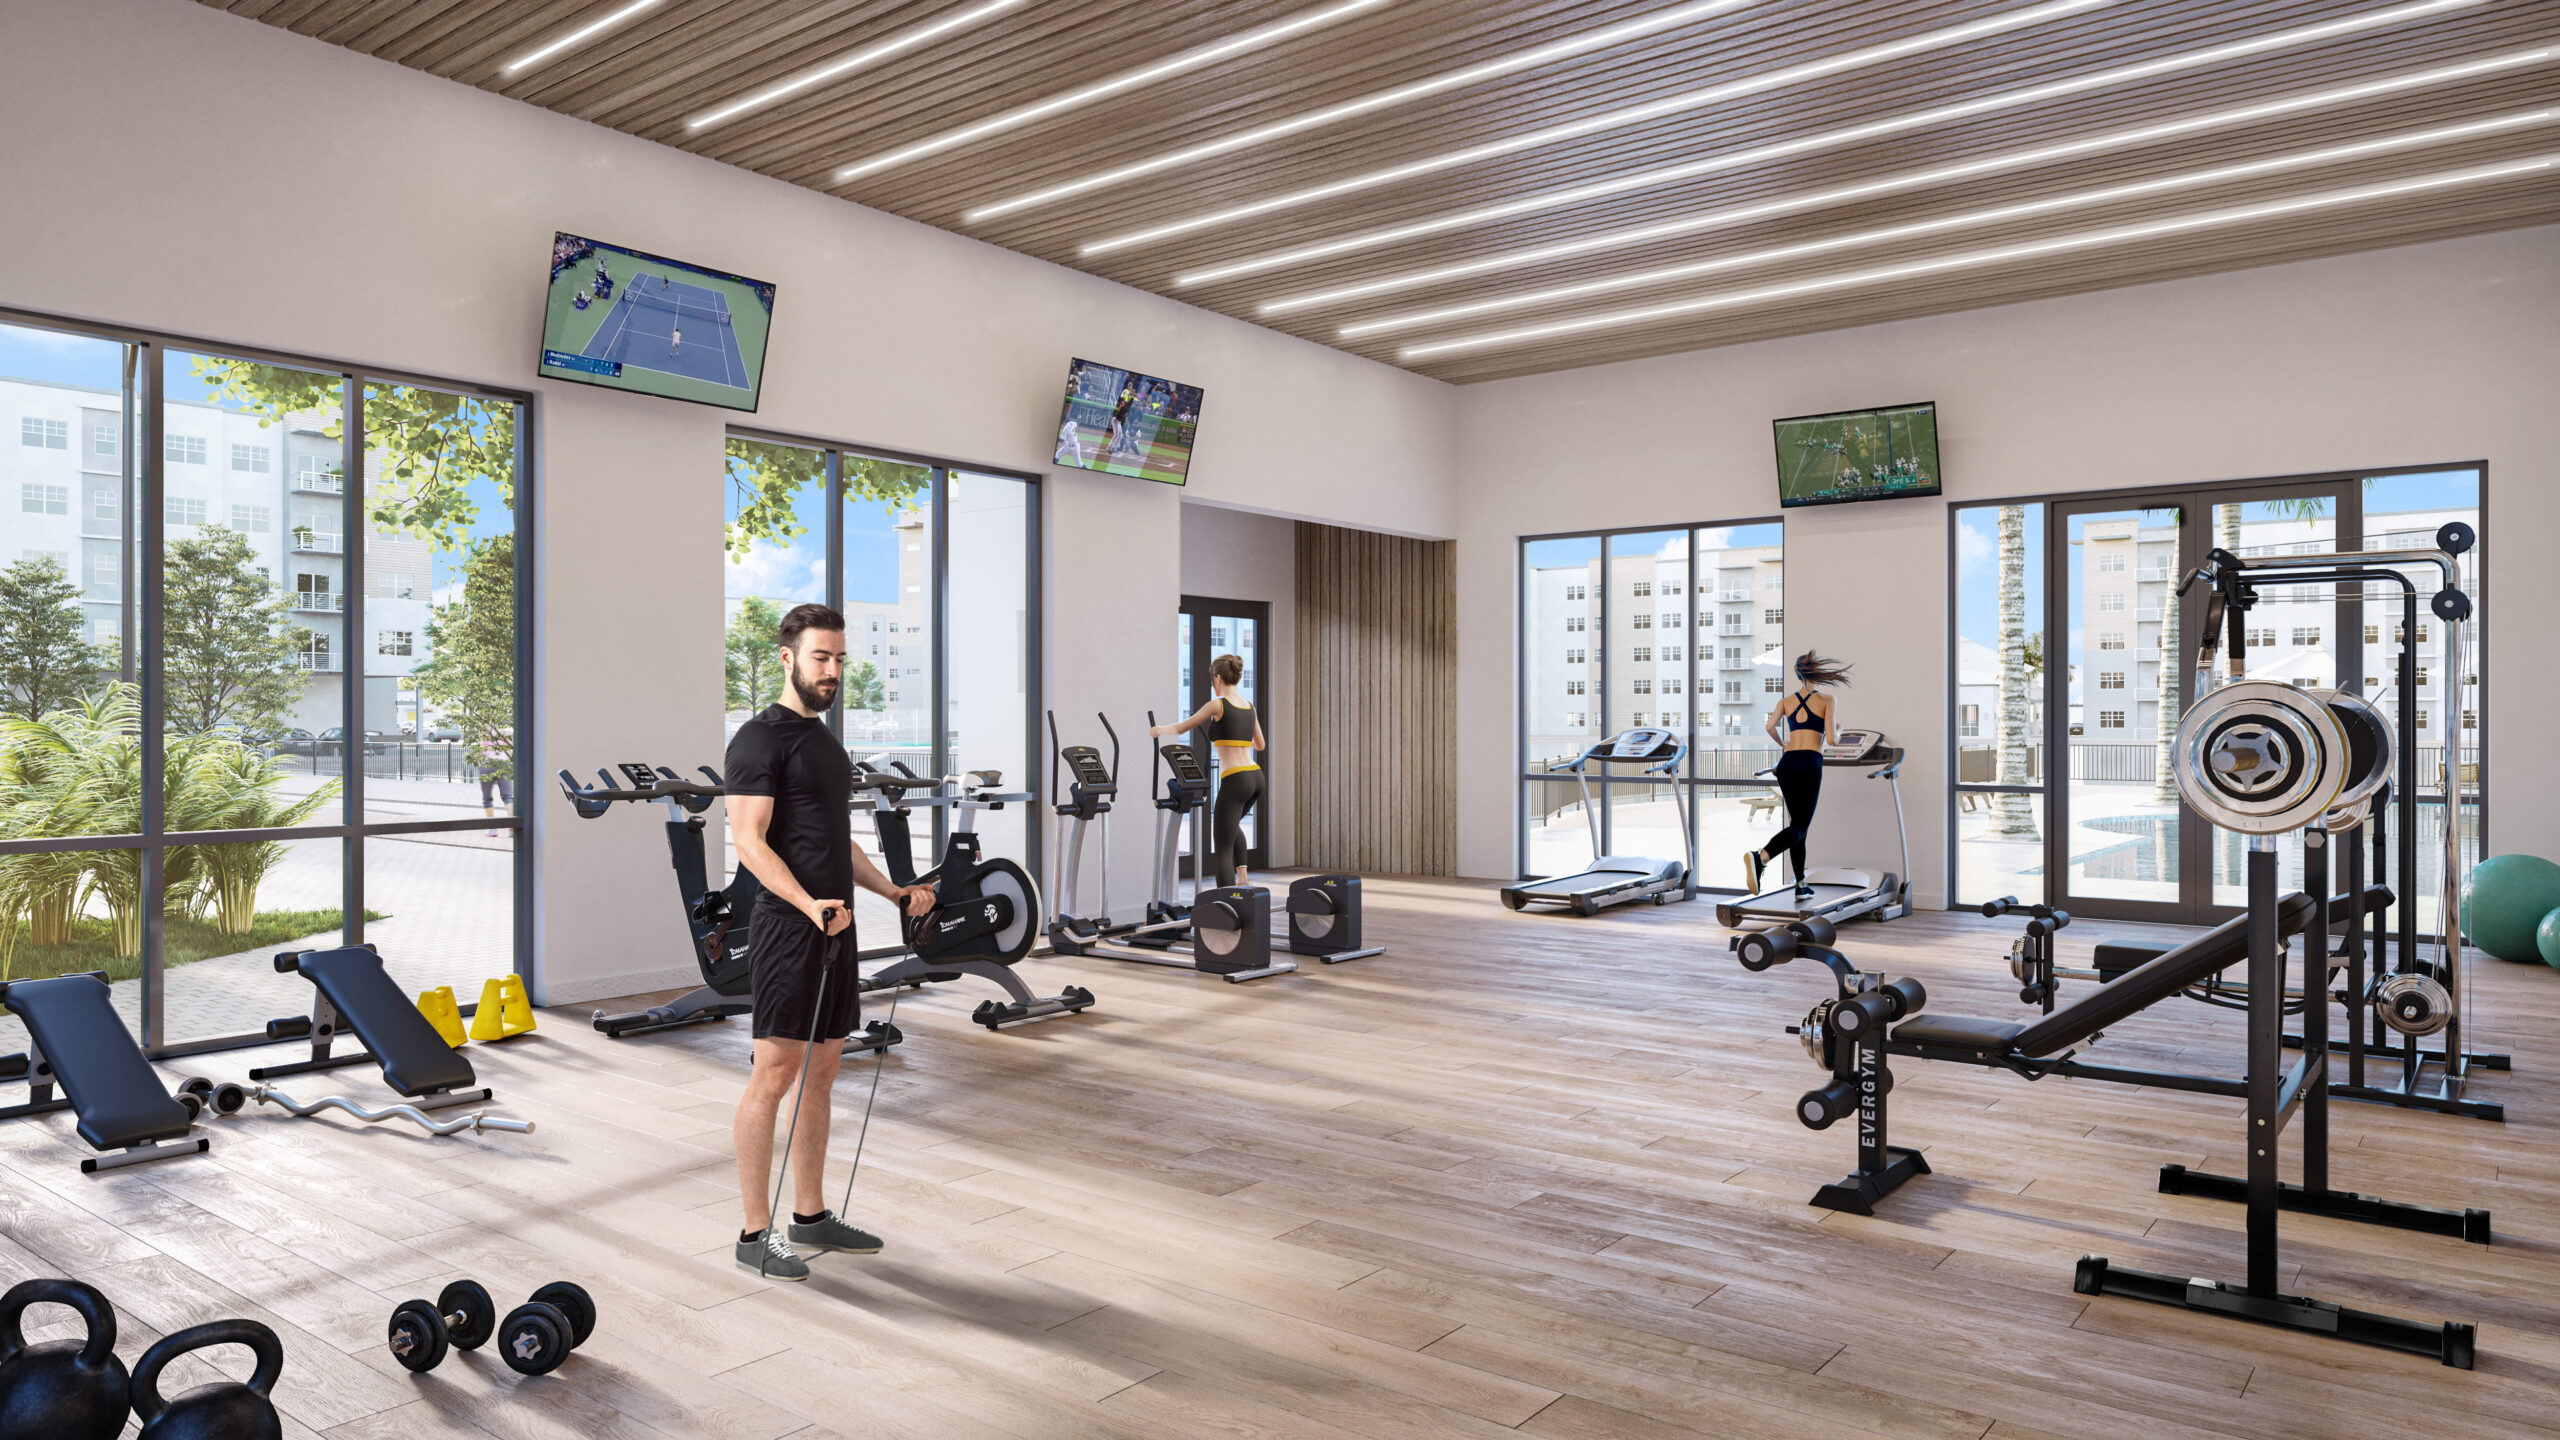 MIR_Millenia_4. Clubhouse Fitness Center HR Rendering v2_2020.06.30